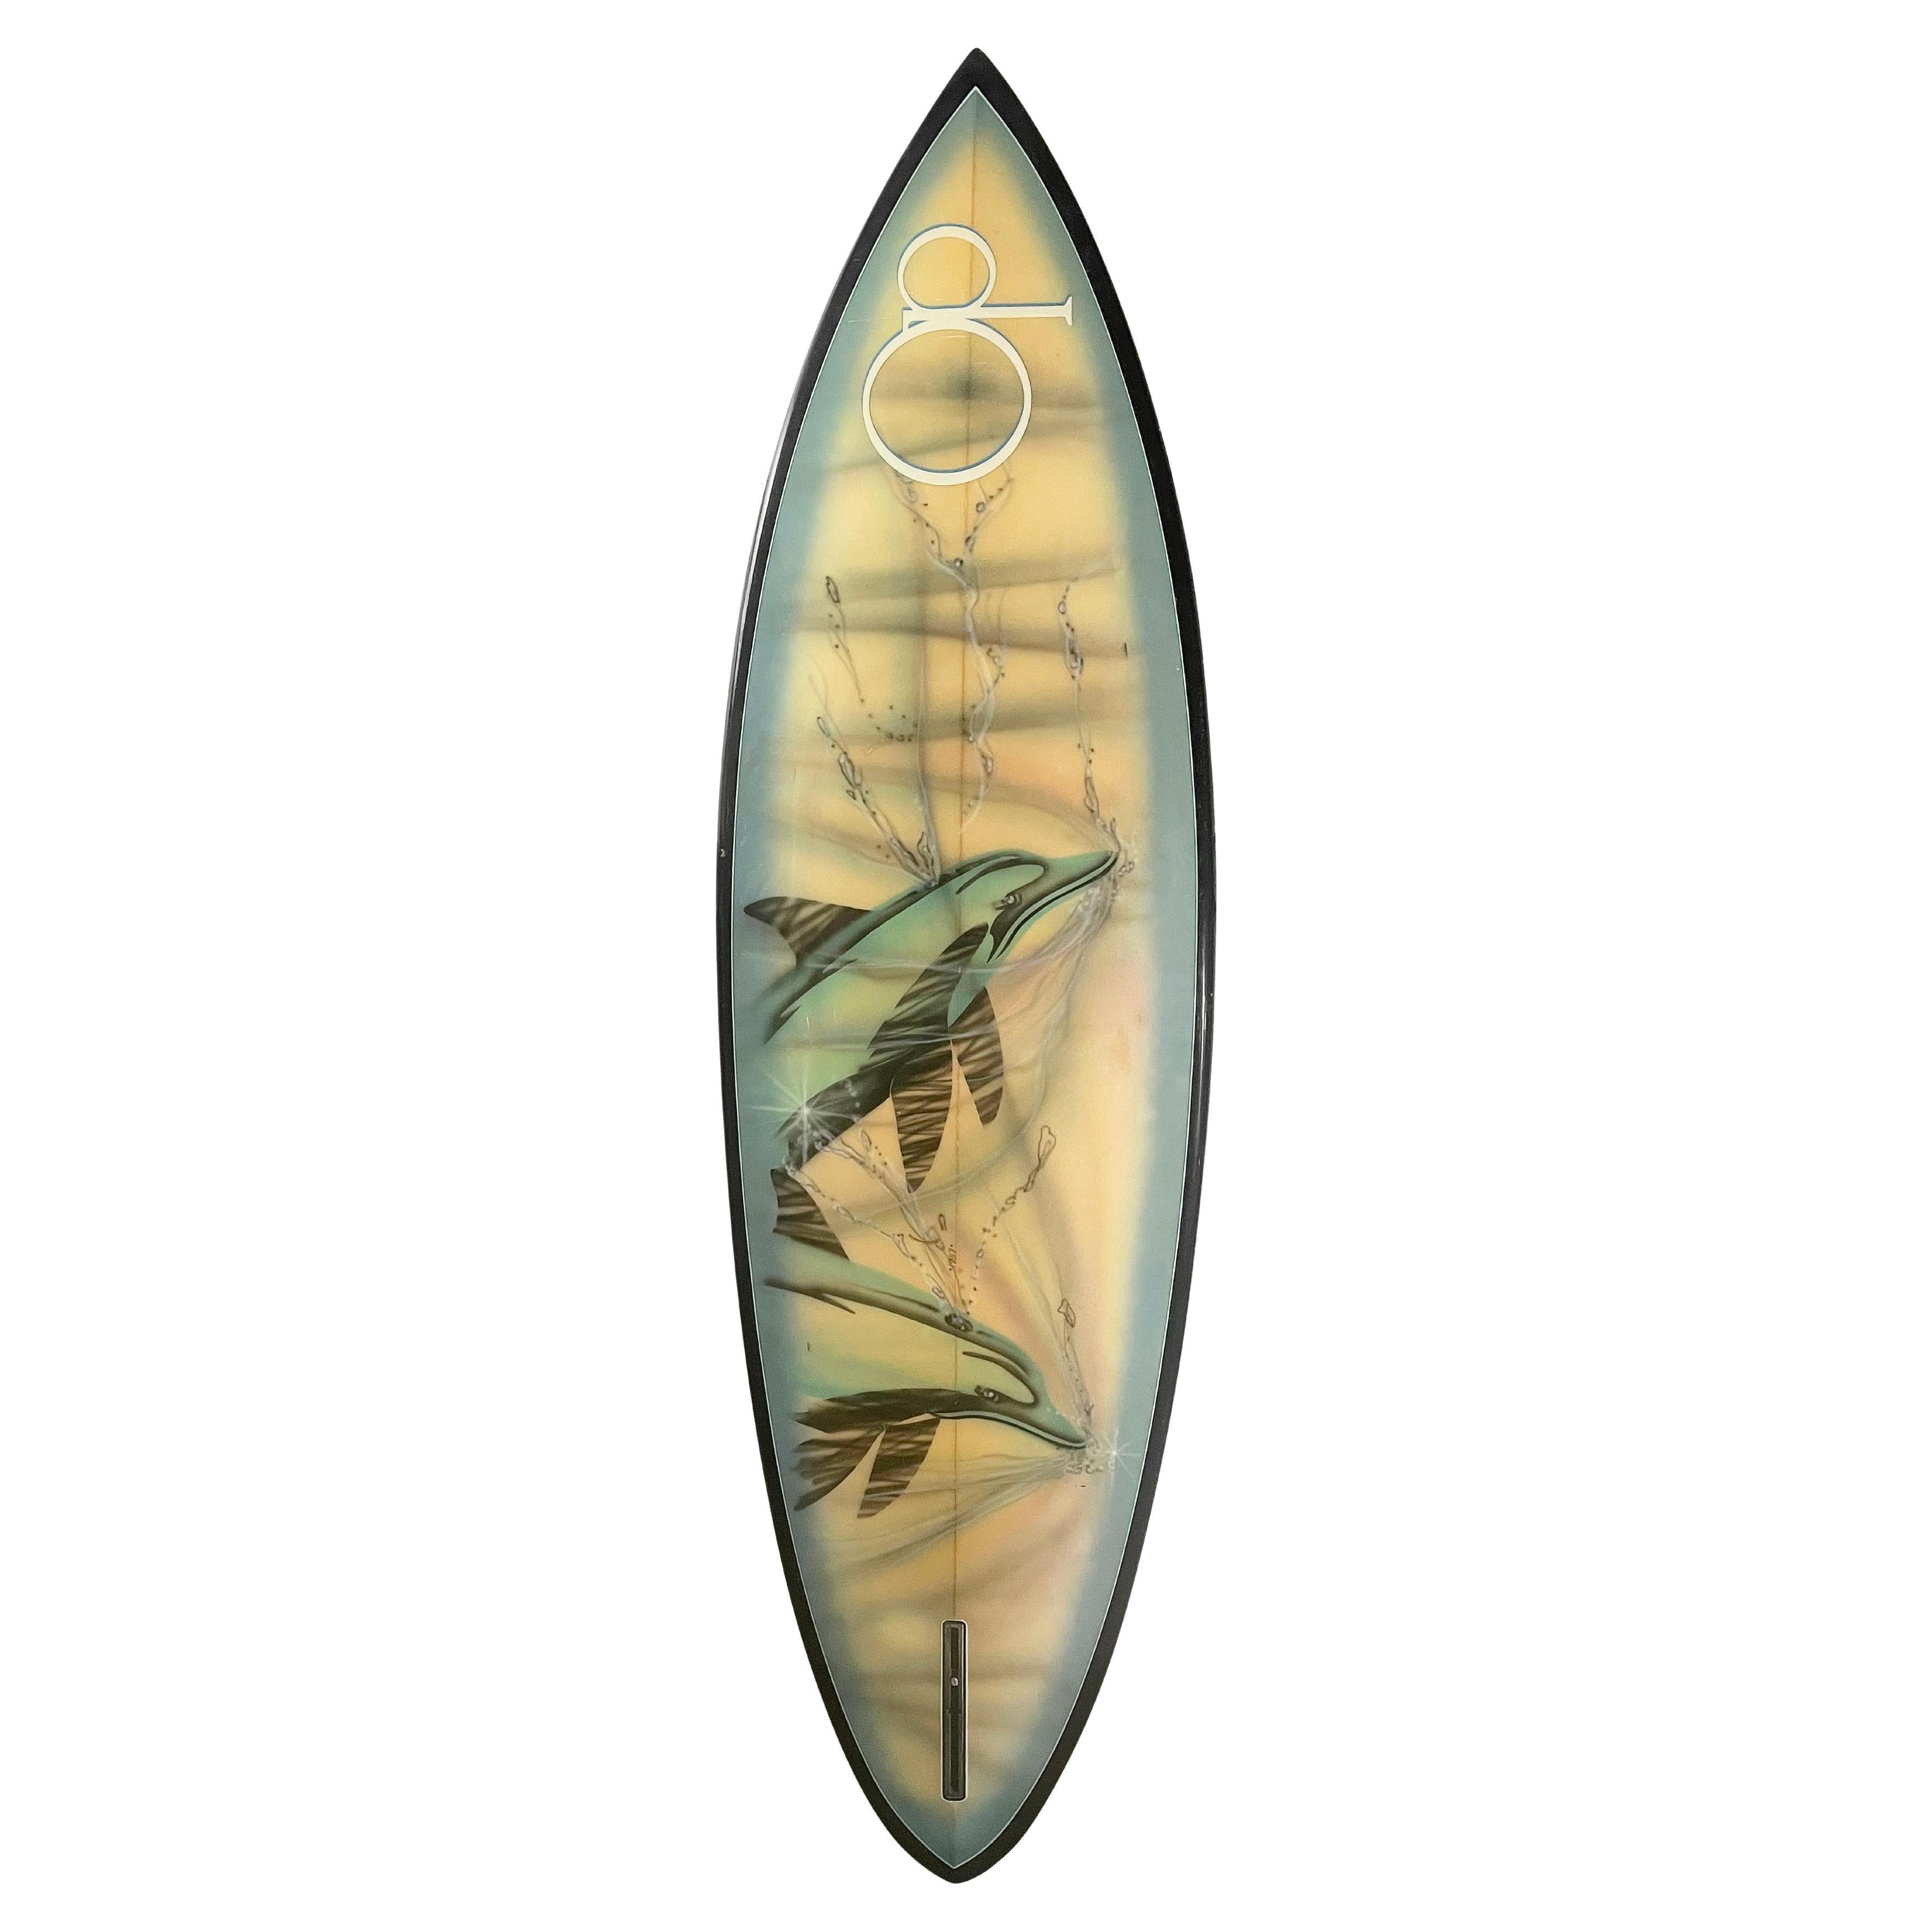 1970s Vintage Ocean Pacific Dolphin Mural Artwork Surfboard For Sale